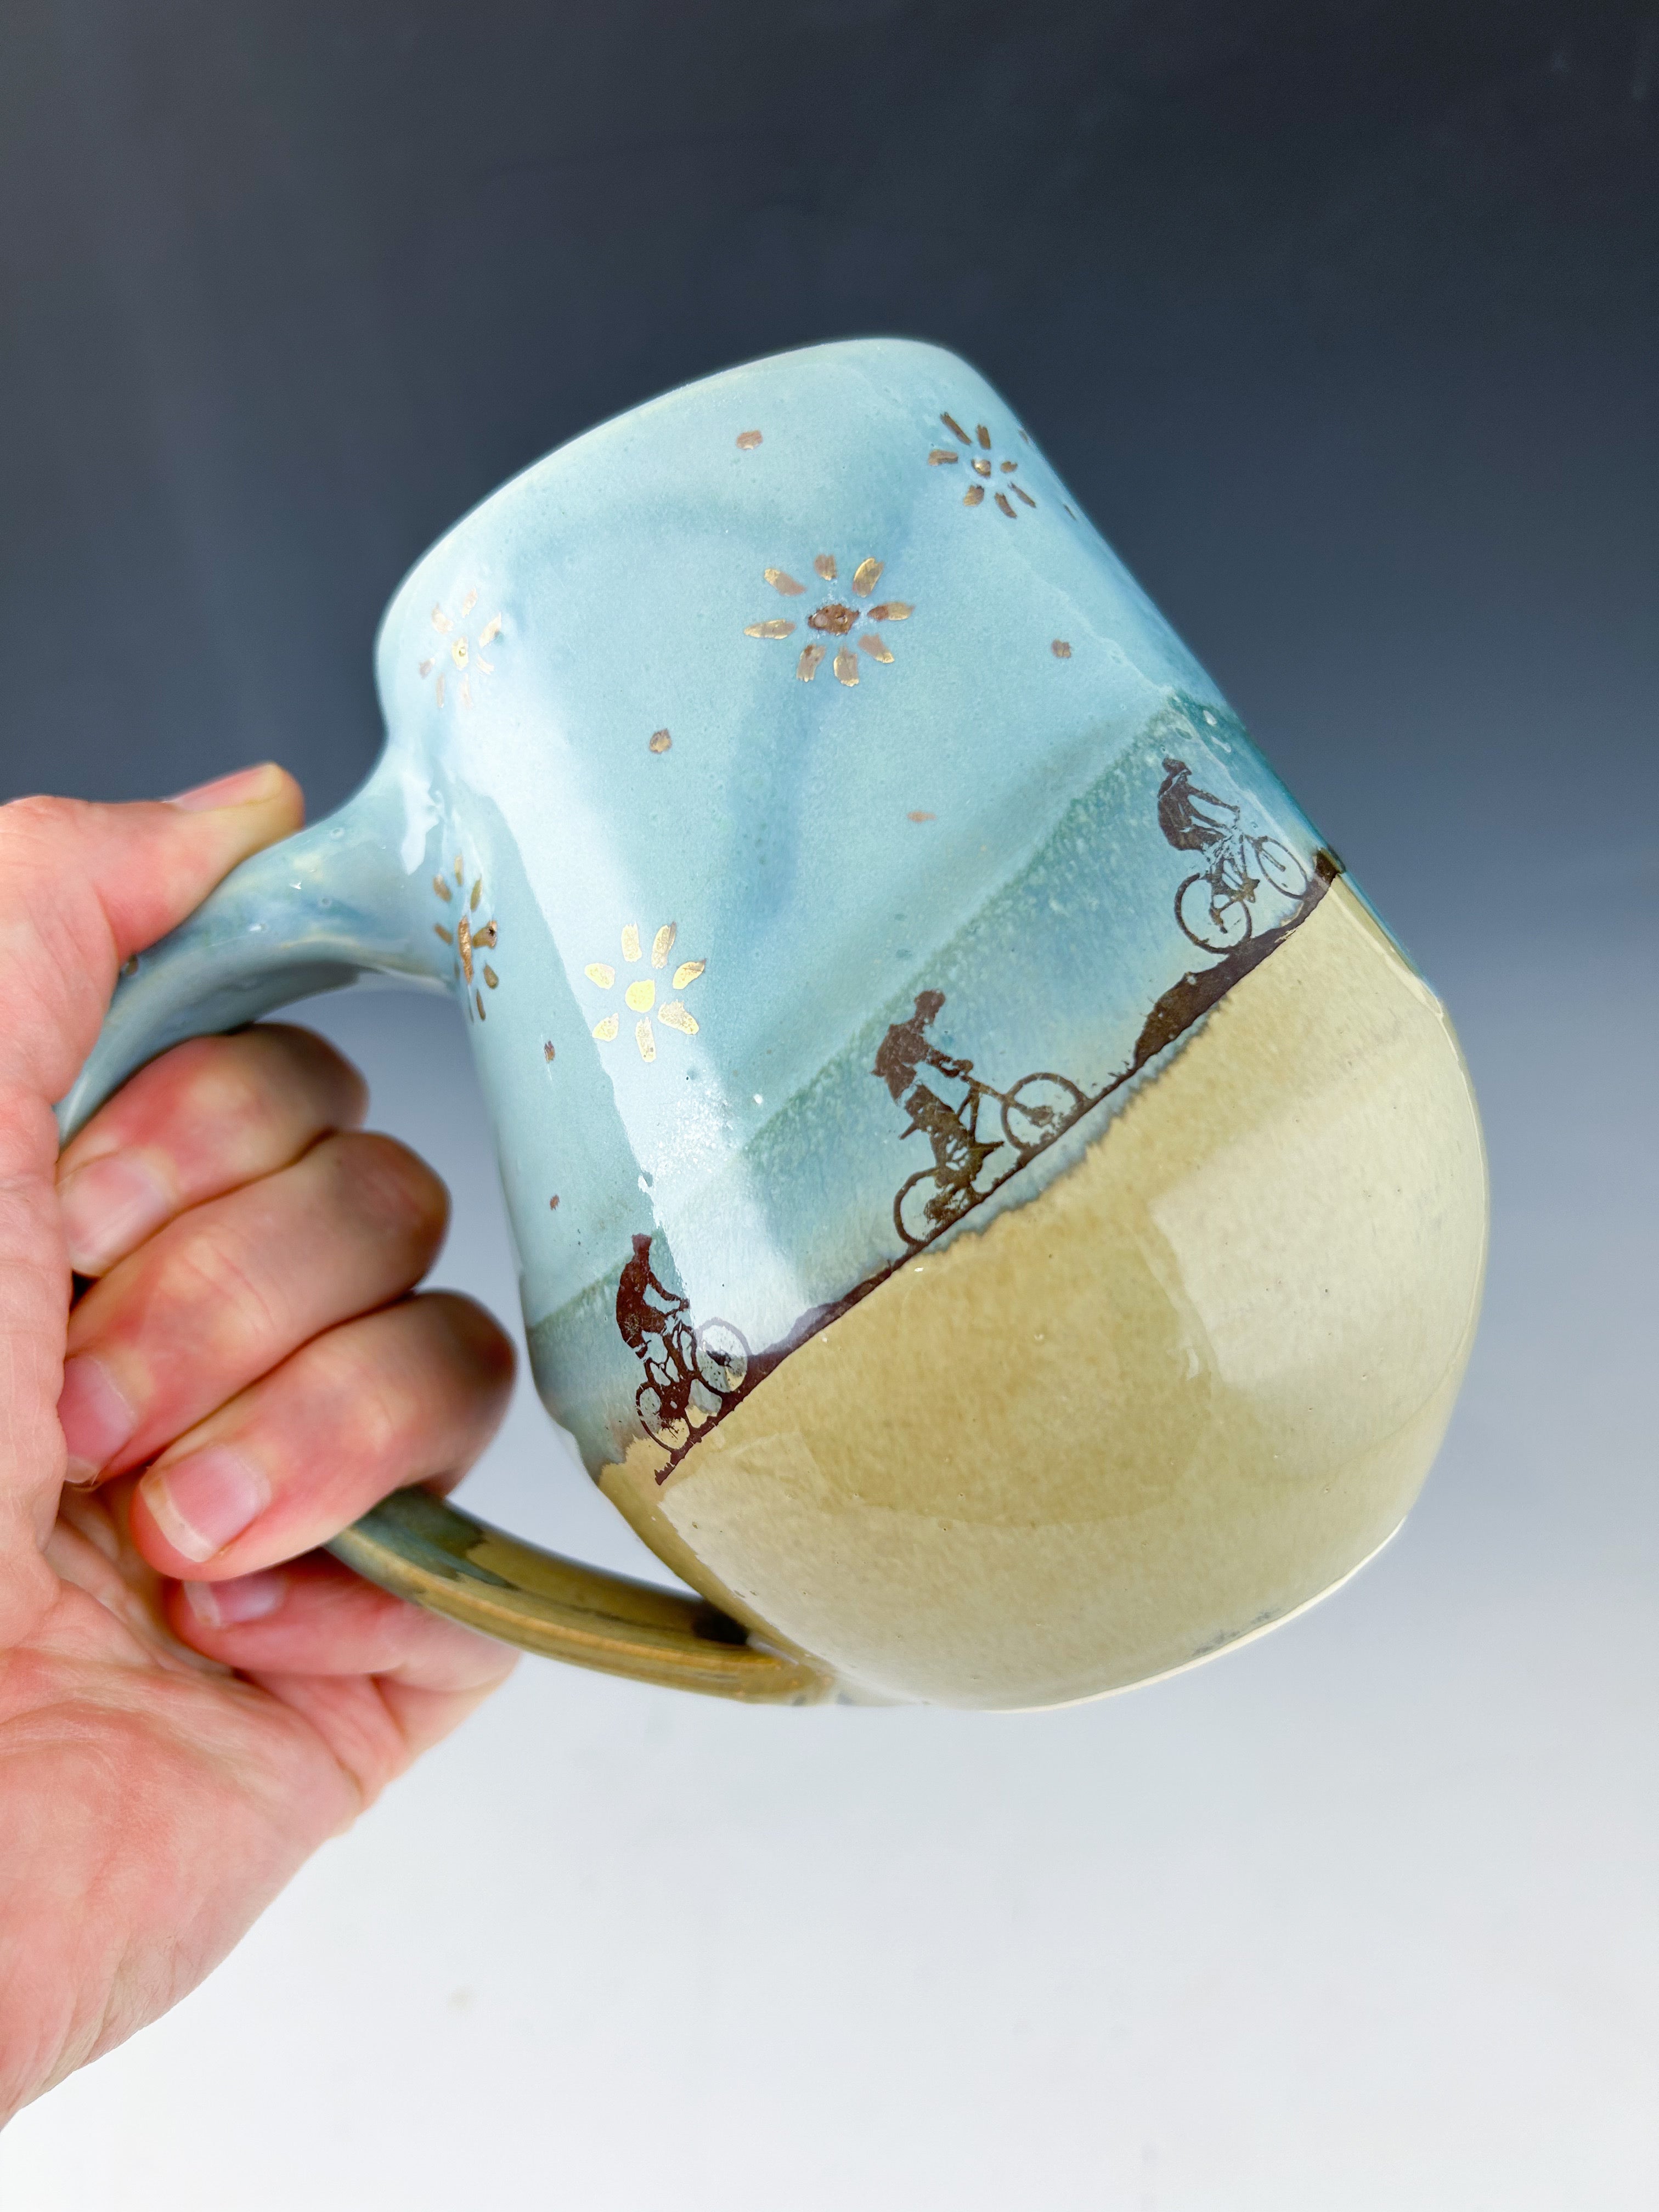 Mountain Bike Mug in Blue and Brown with Gold Luster